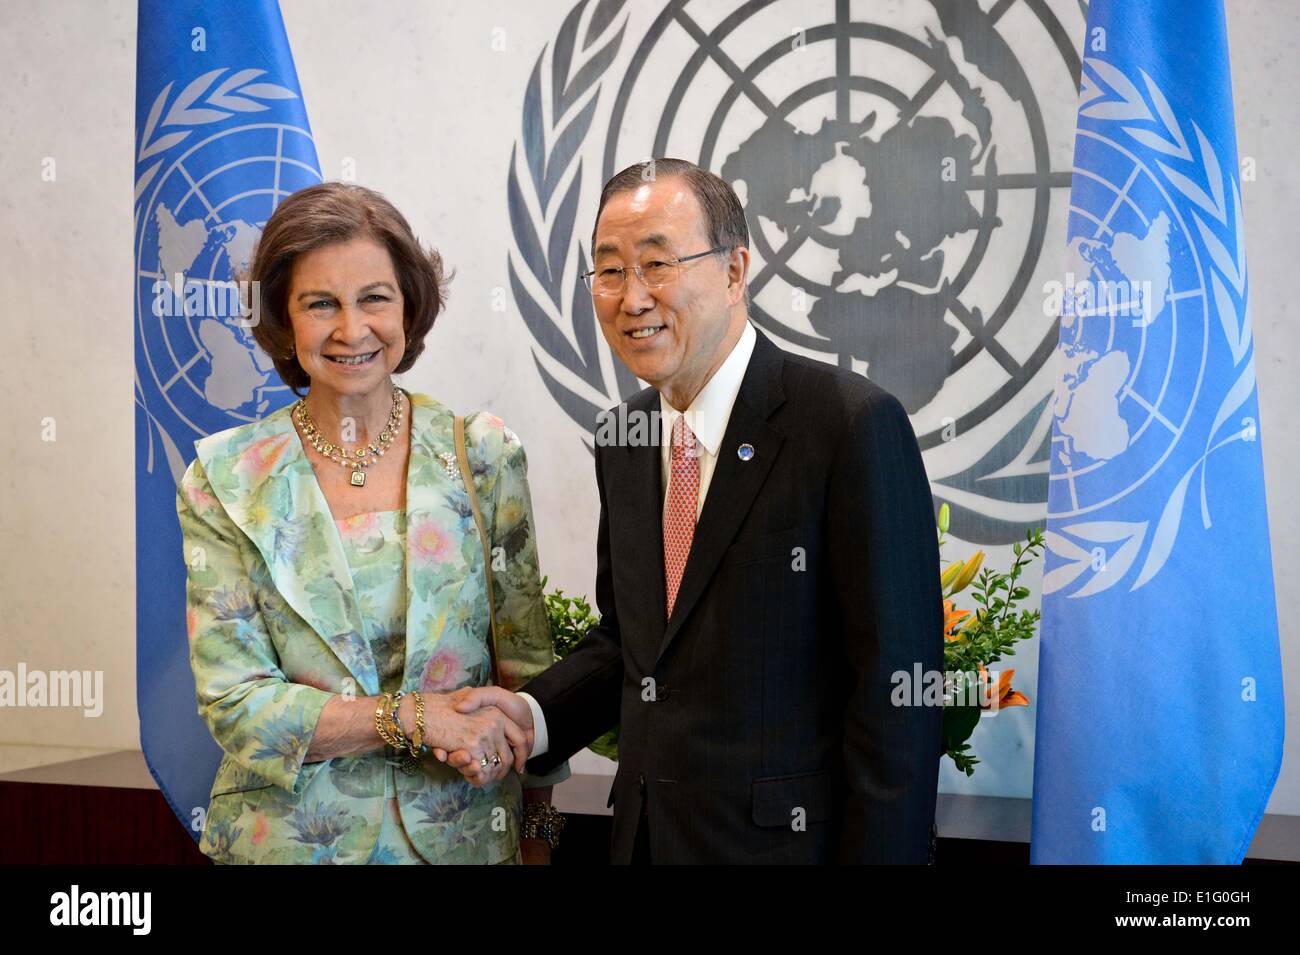 New York, USA. 3rd June, 2014. United Nations Secretary-General Ban Ki-moon (R) shakes hands with Queen Sofia of Spain prior to their meeting at the UN headquarters in New York, on June 3, 2014, a day after King Juan Carlos of Spain announced his abdication in favor of his son, the 46-year-old Crown Prince Felipe. Credit:  Niu Xiaolei/Xinhua/Alamy Live News Stock Photo